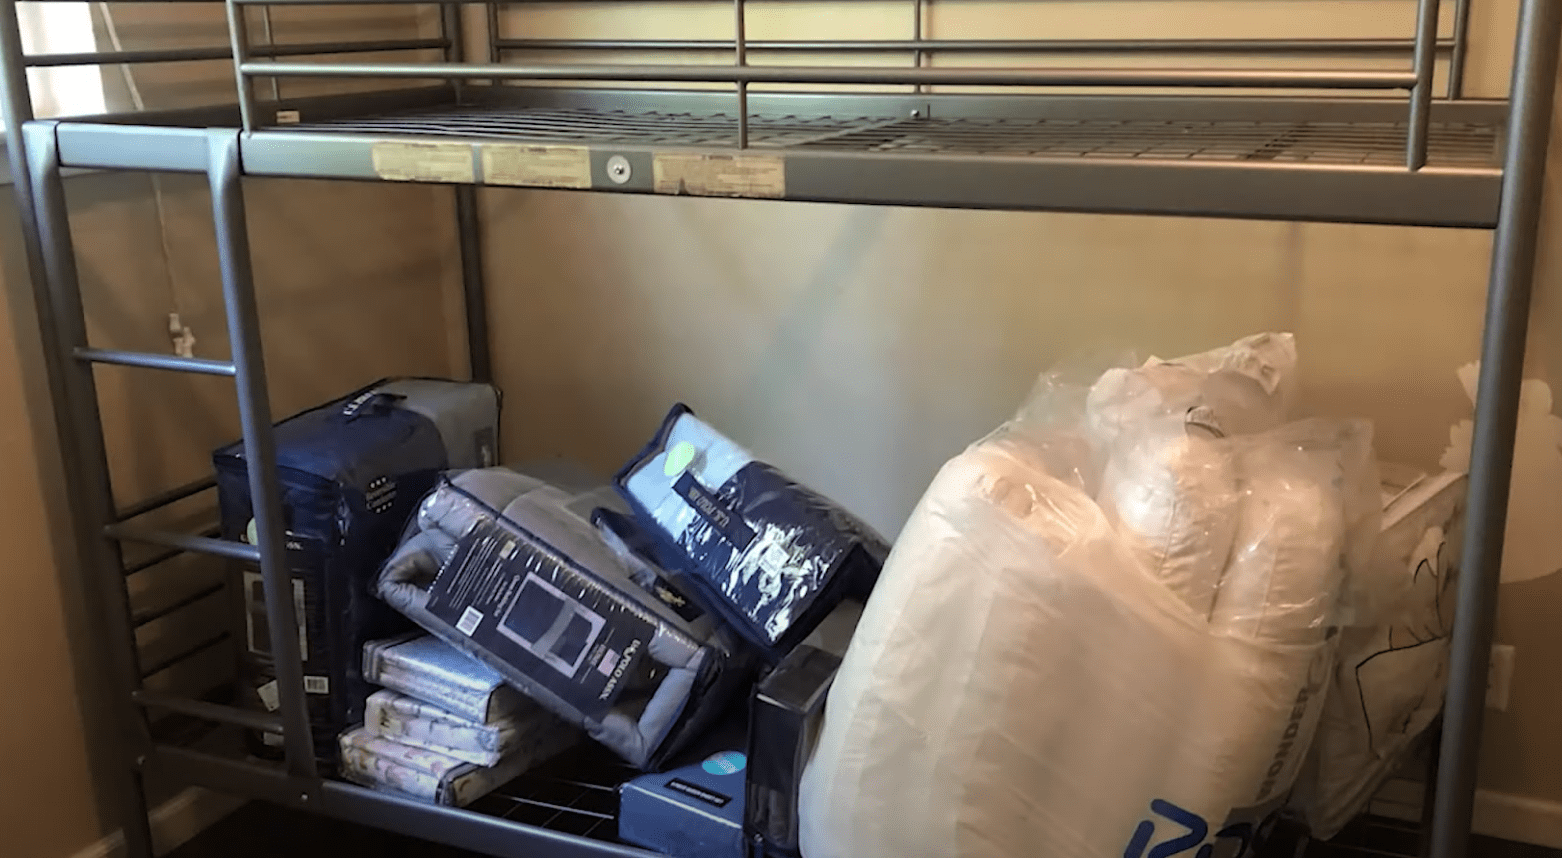 New beds and home items donated to a family thanks to caring police officers | Photo: youtube.com/CBSDFW